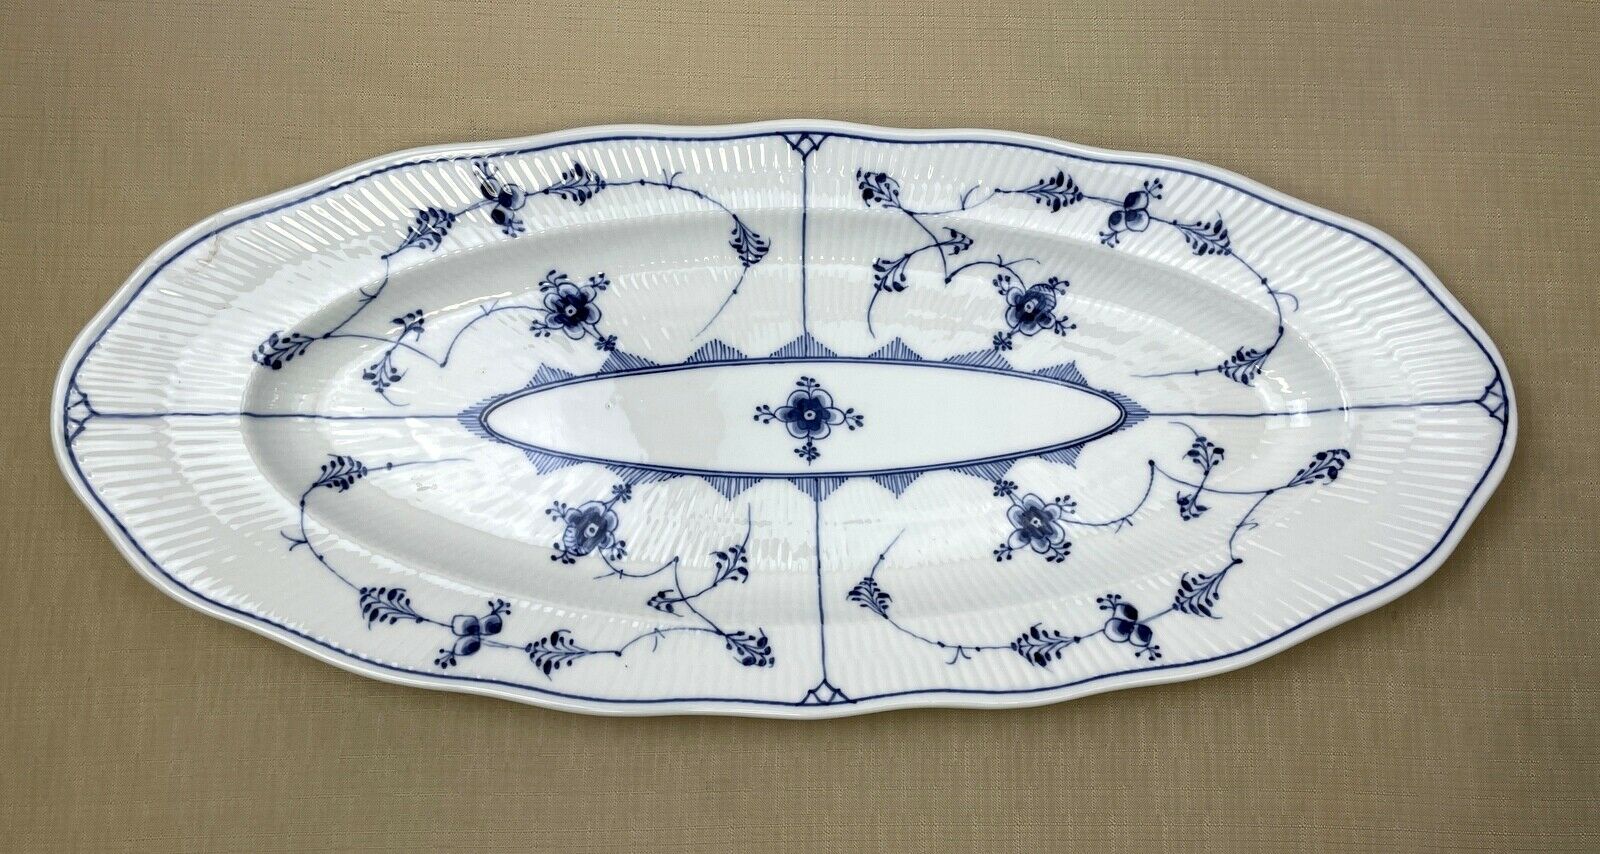 Antique Royal Copenhagen Blue Fluted Fish Platter #105 23-3/4" As-is Repaired